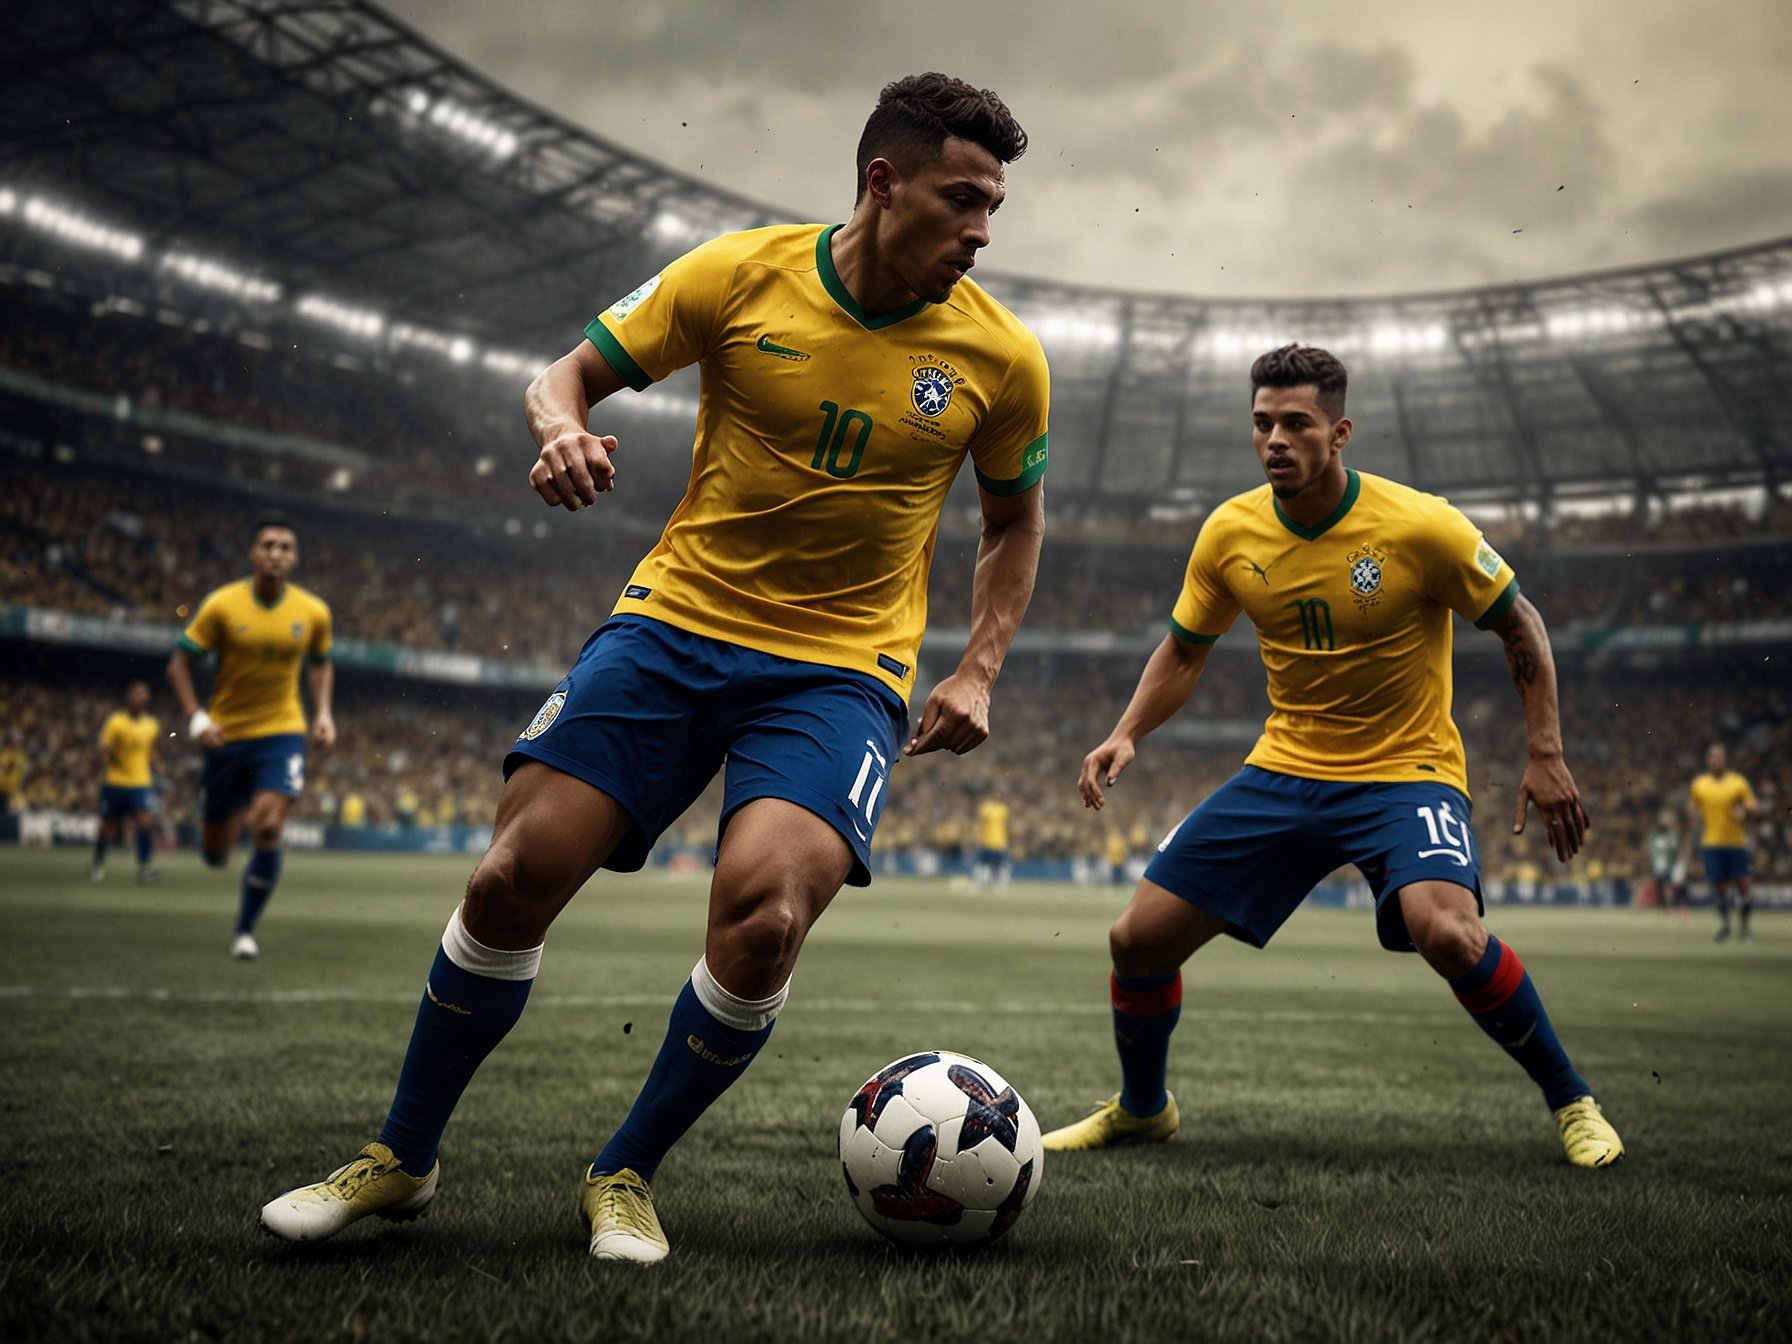 Action shot of Brazilian and Colombian players vying for possession on the pitch, highlighting the intensity and competitive spirit of the Copa America clash.